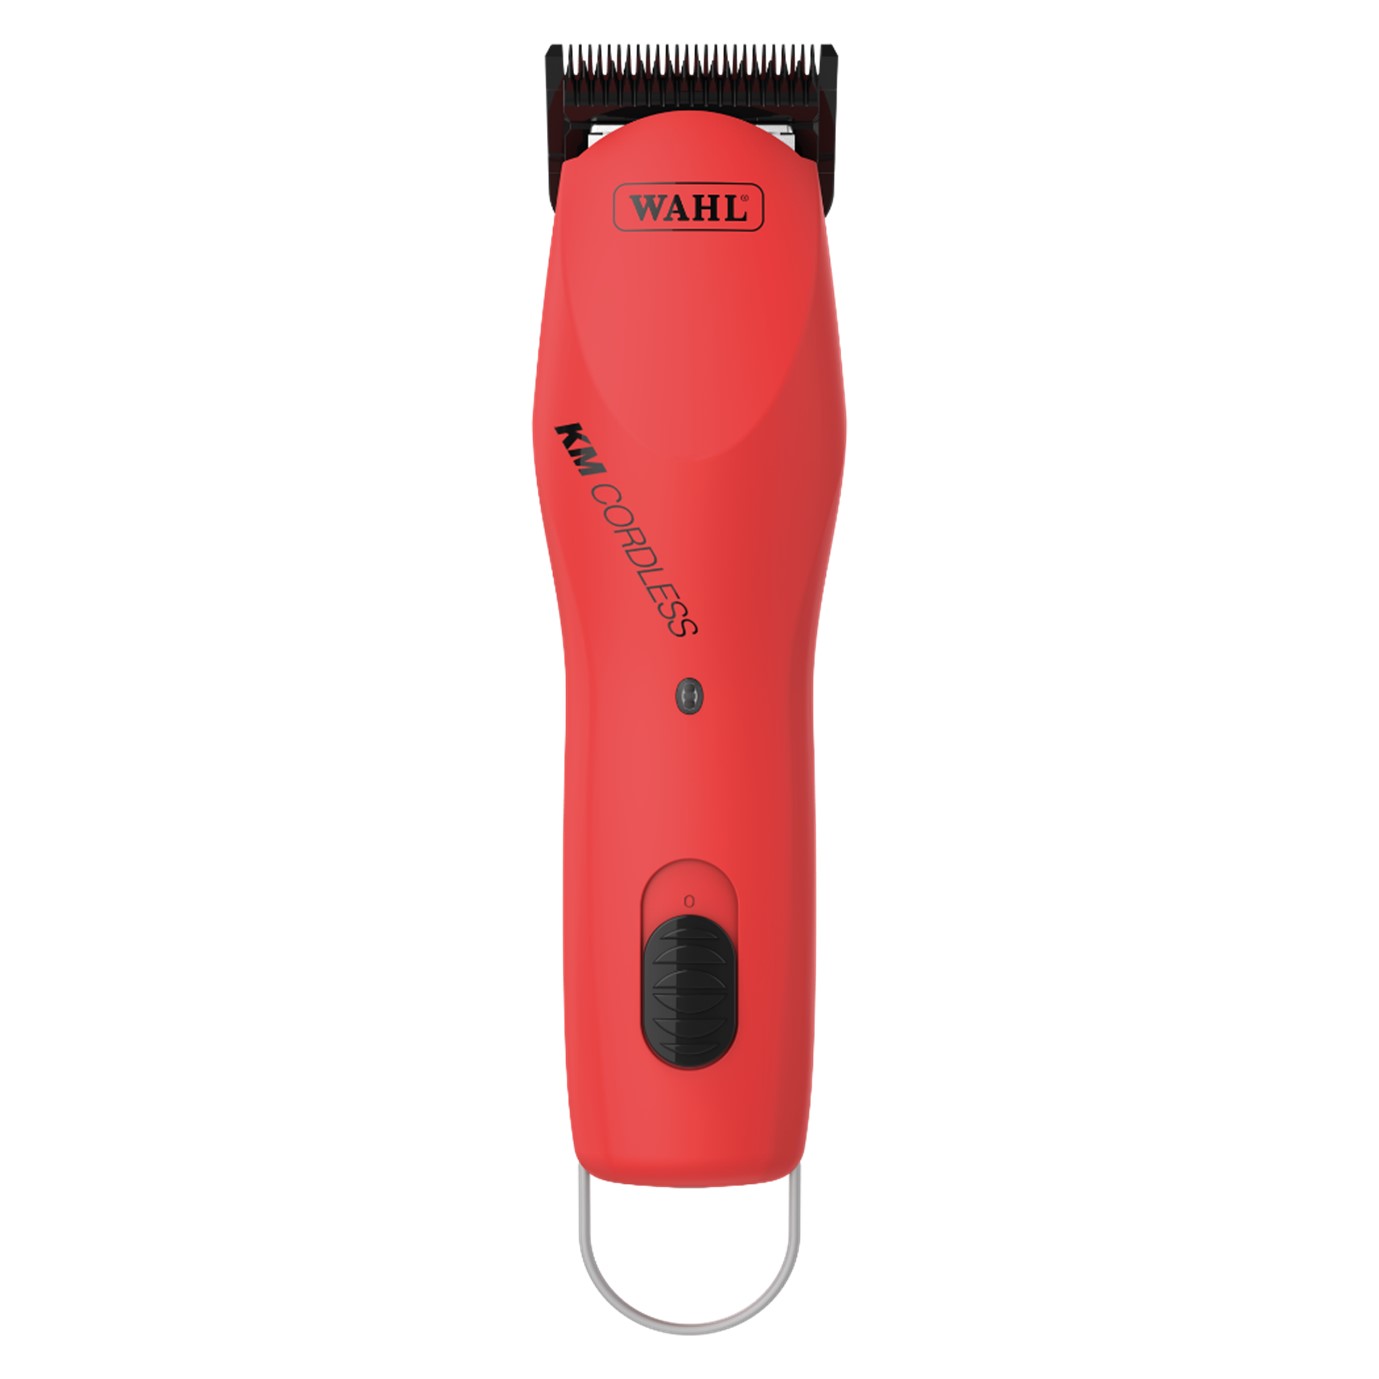 Wahl KM Cordless clipper on sale - save £85